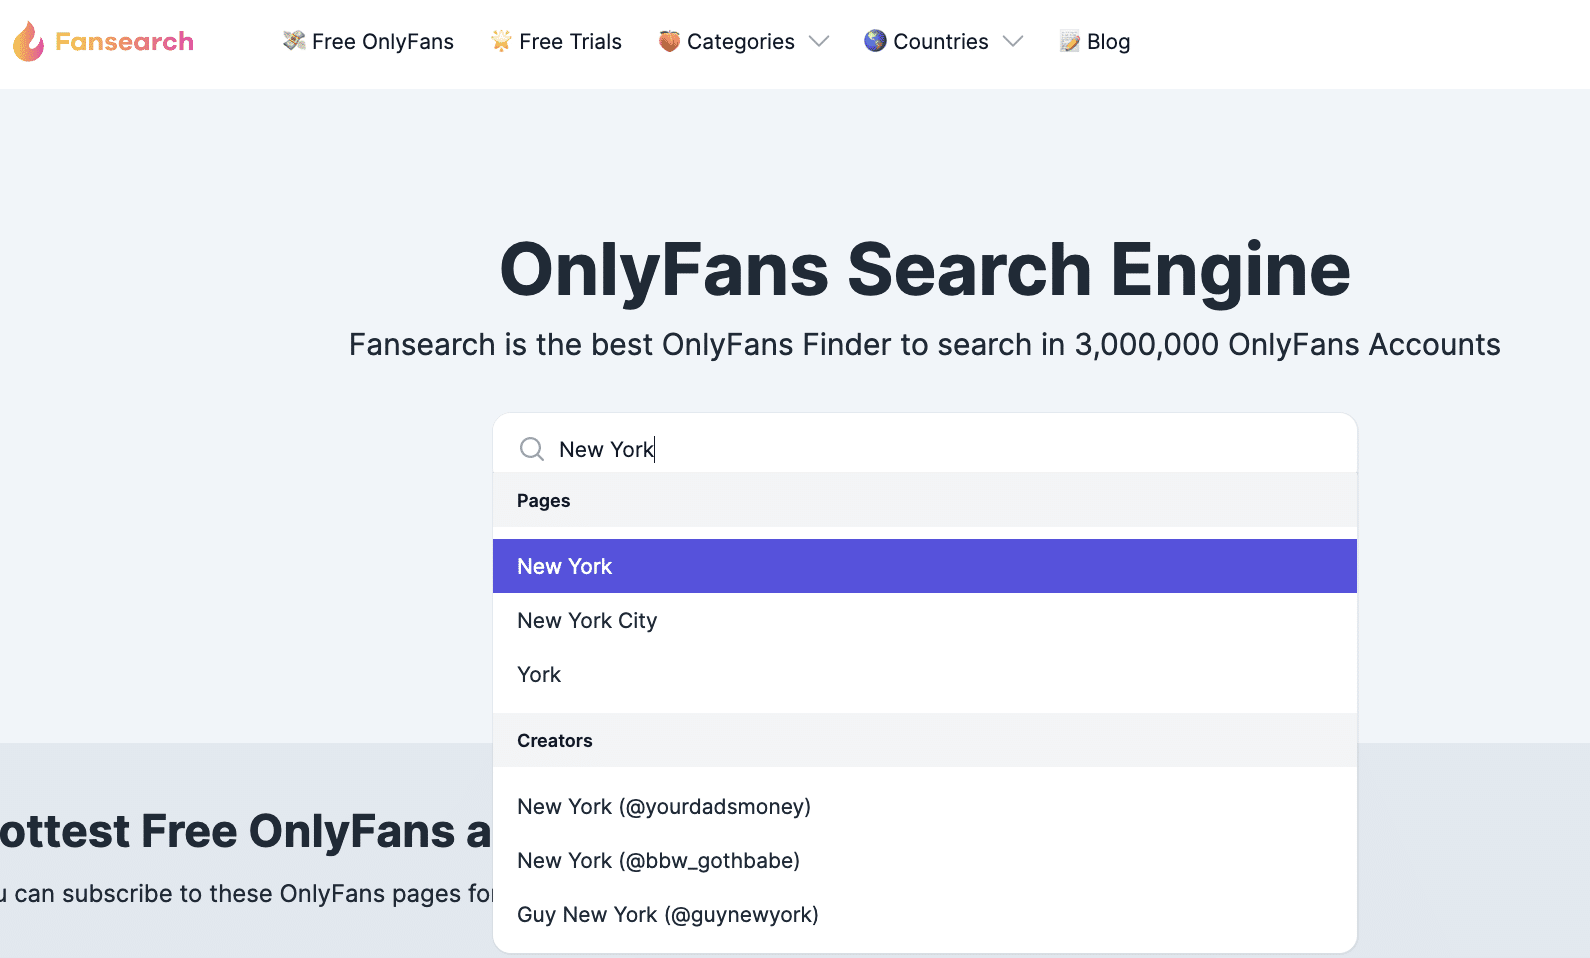 Example search at Fansearch search engine